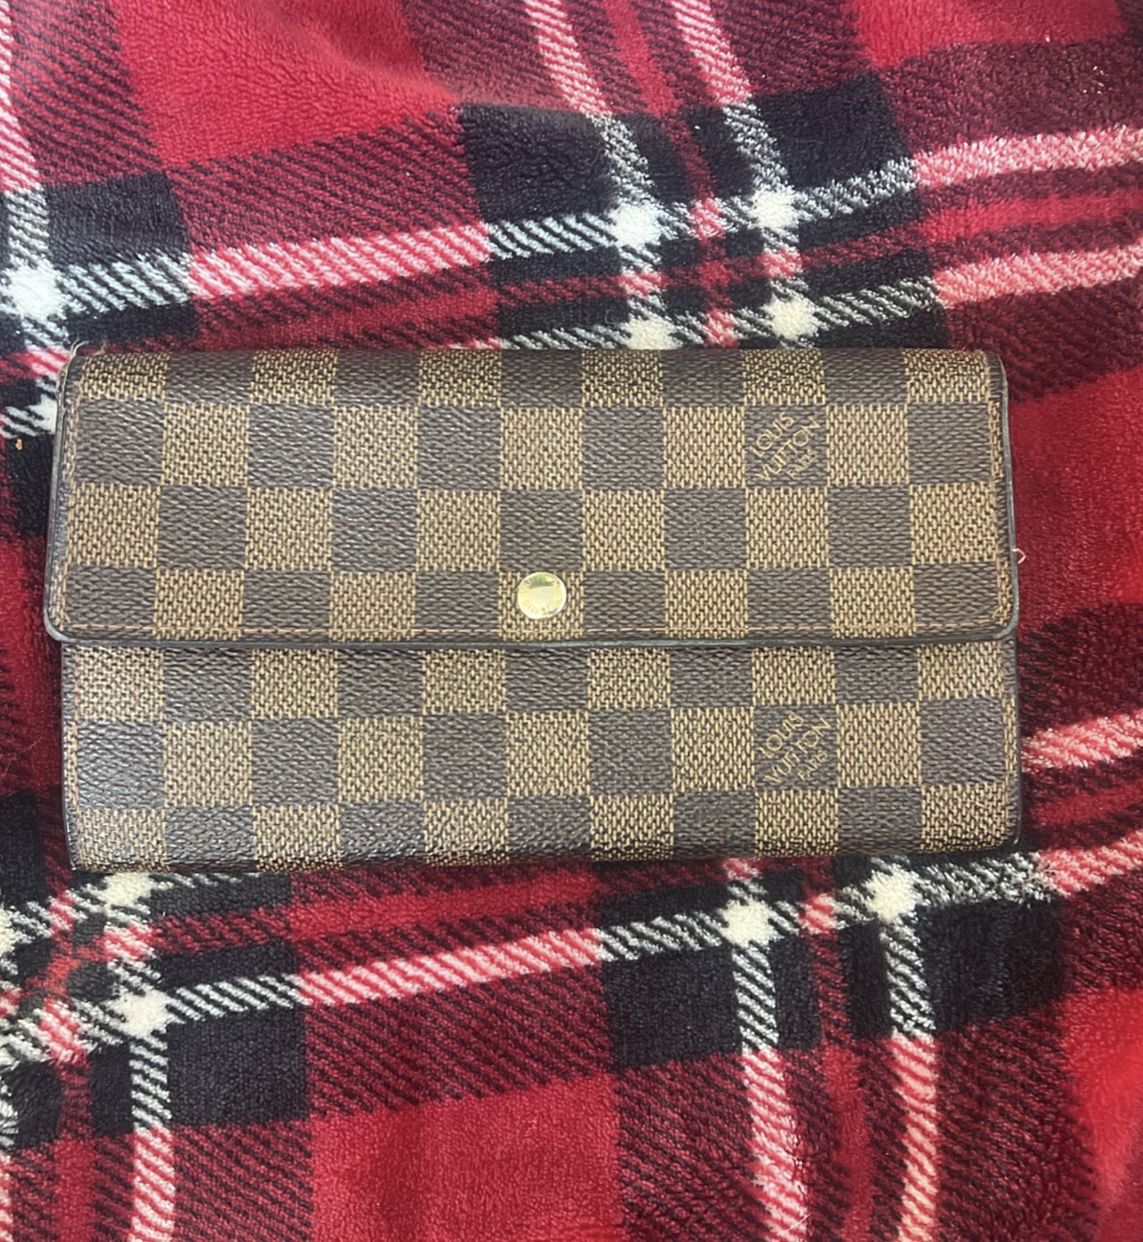 LOUIS VUITTON $200 orig500 TODAY ONLY ! DAMIER PRIME COND